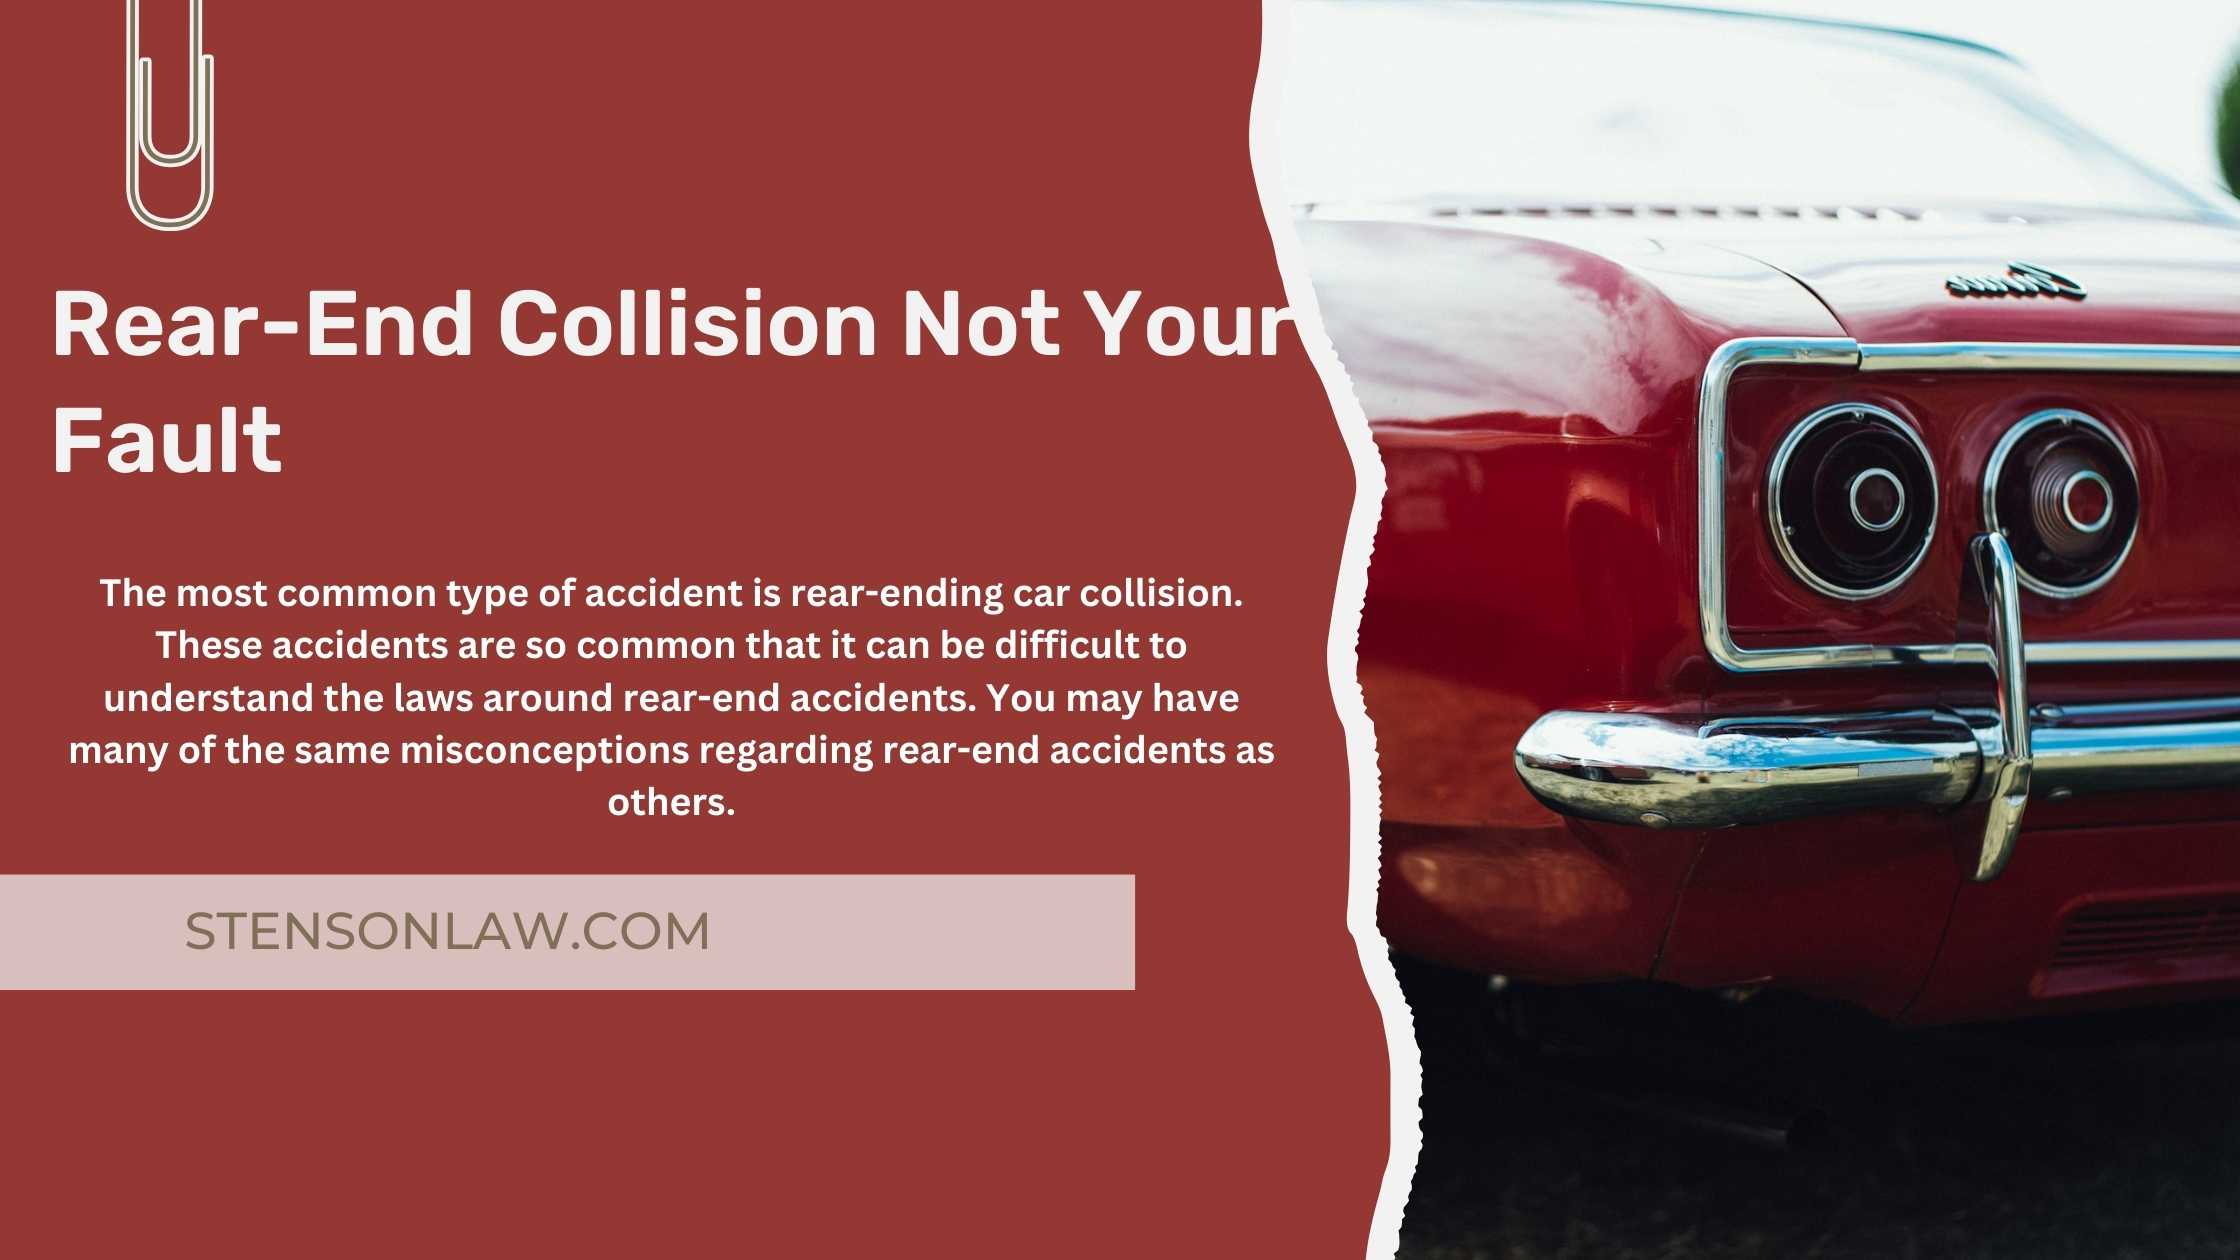 Rear-End Collision Not Your Fault